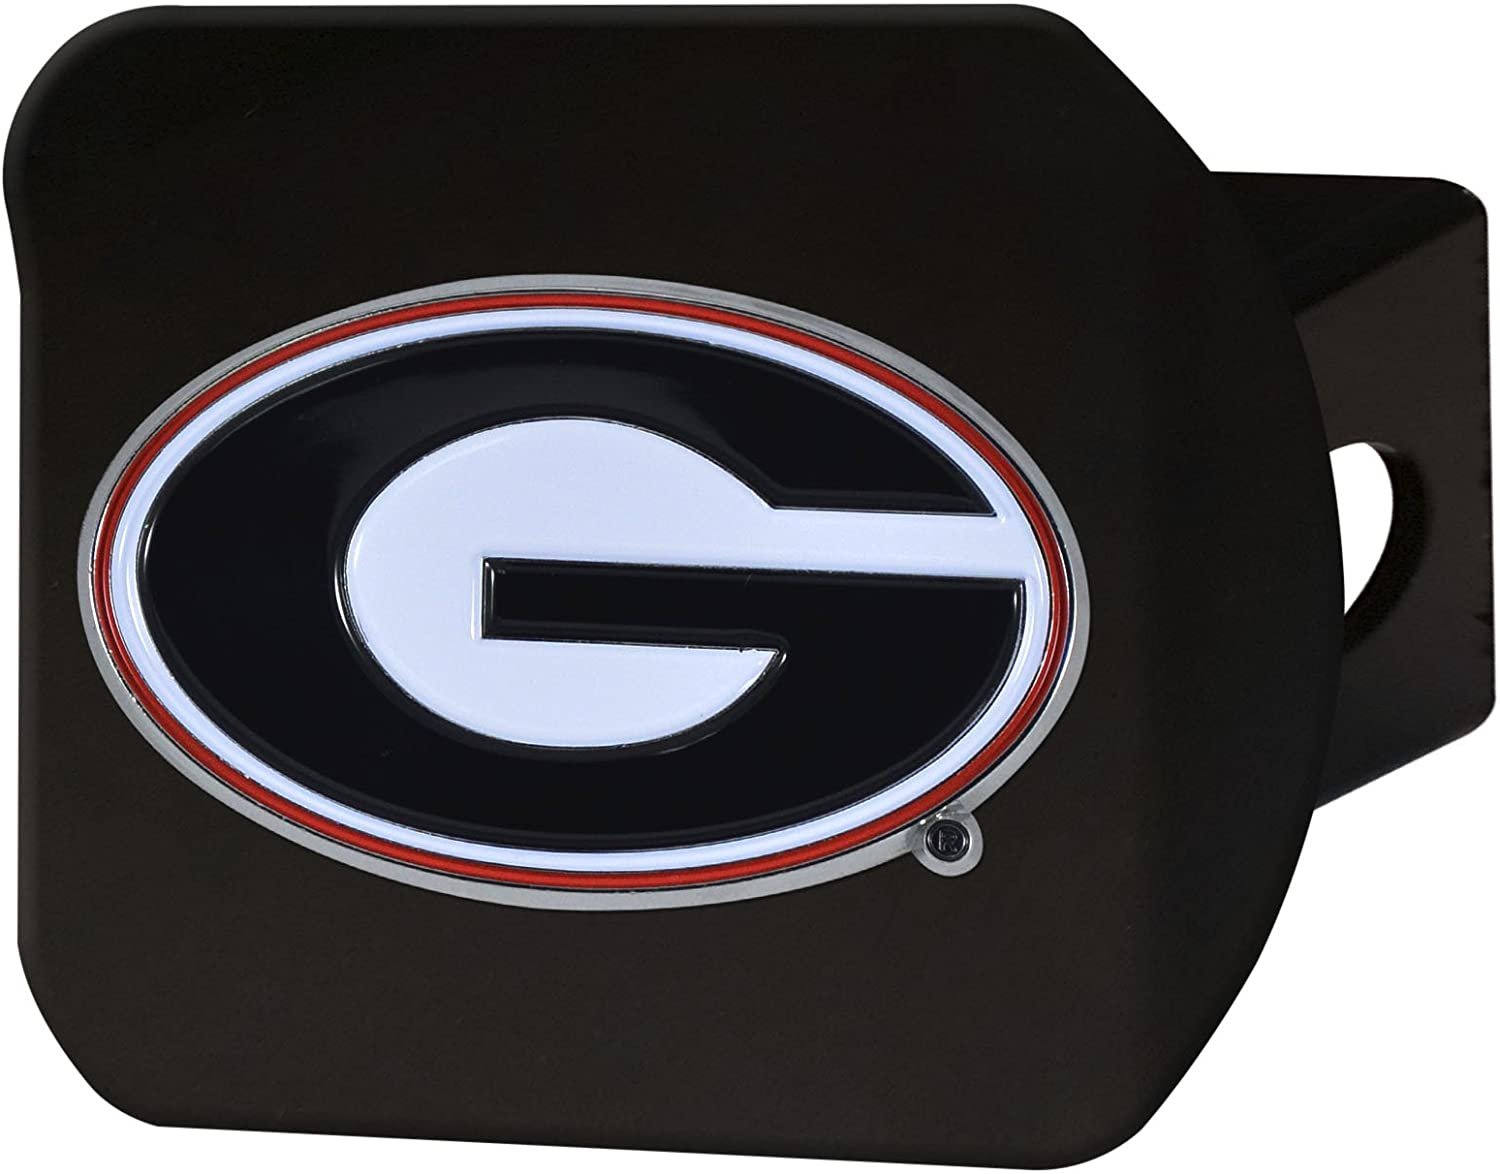 Georgia Bulldogs Hitch Cover Black Solid Metal with Raised Color Metal Emblem 2" Square Type III University of